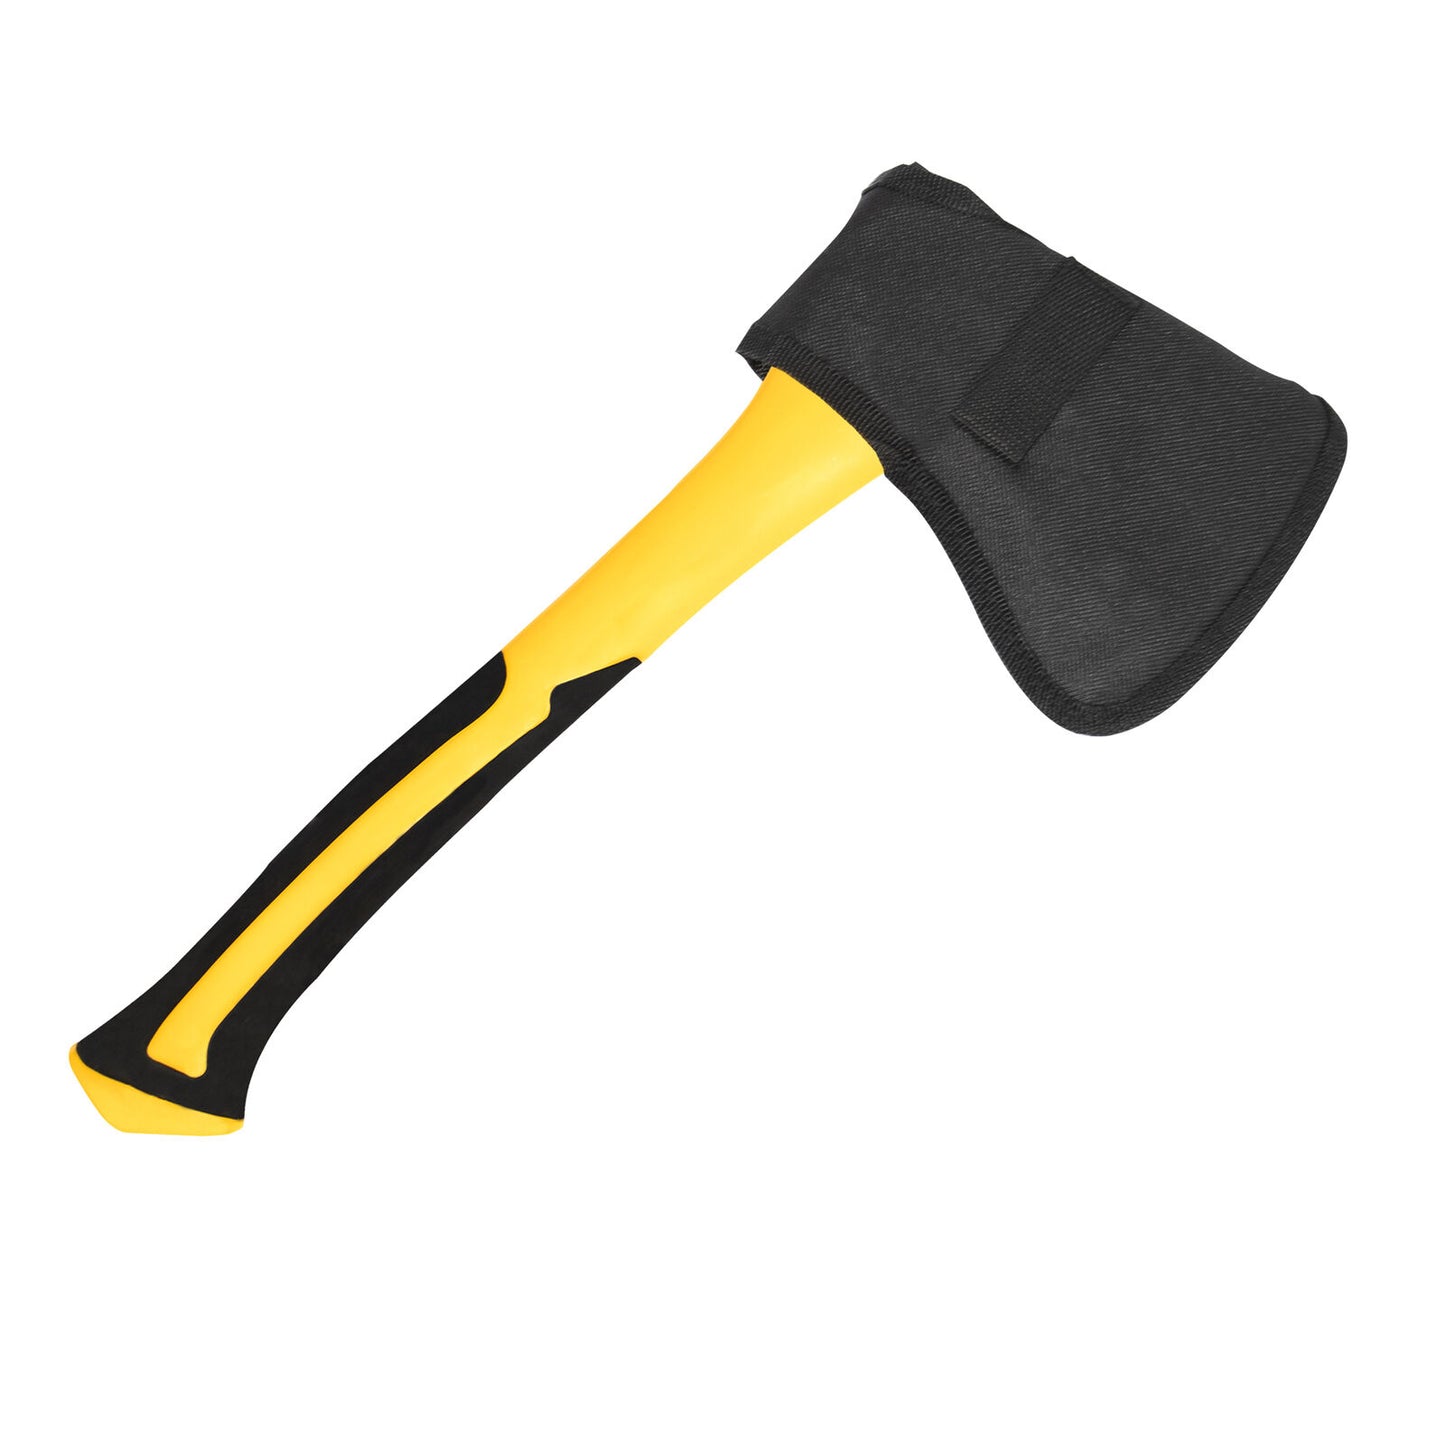 Black and Yellow Deluxe Heavy Duty Camp Compact Axe Hatchet with Sheath